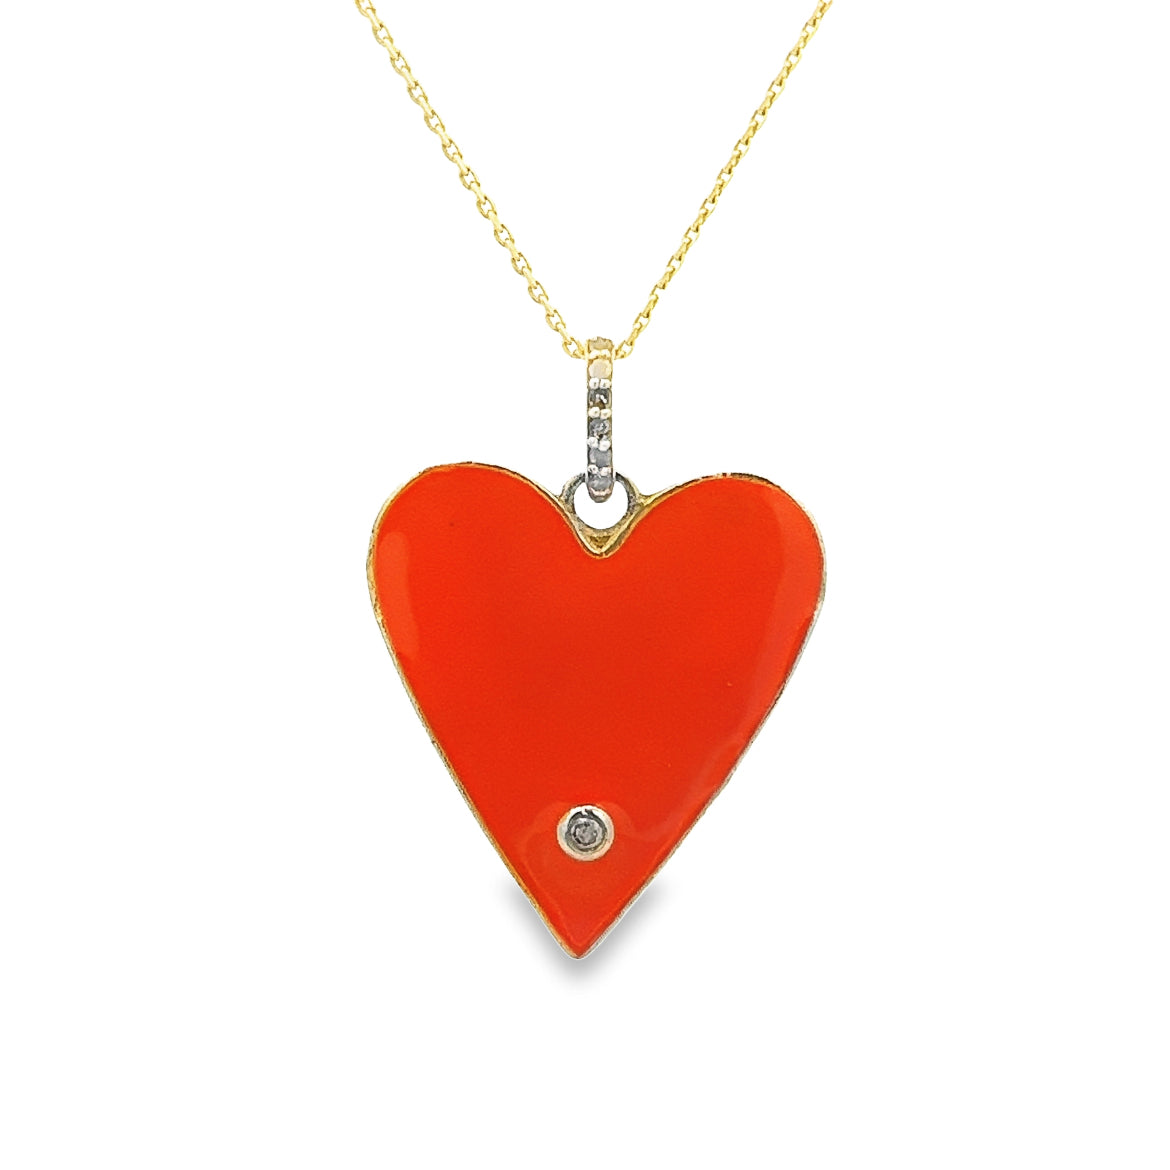 925 SILVER GOLD PLATED HEART CHARM WITH ORANGE ENAMEL